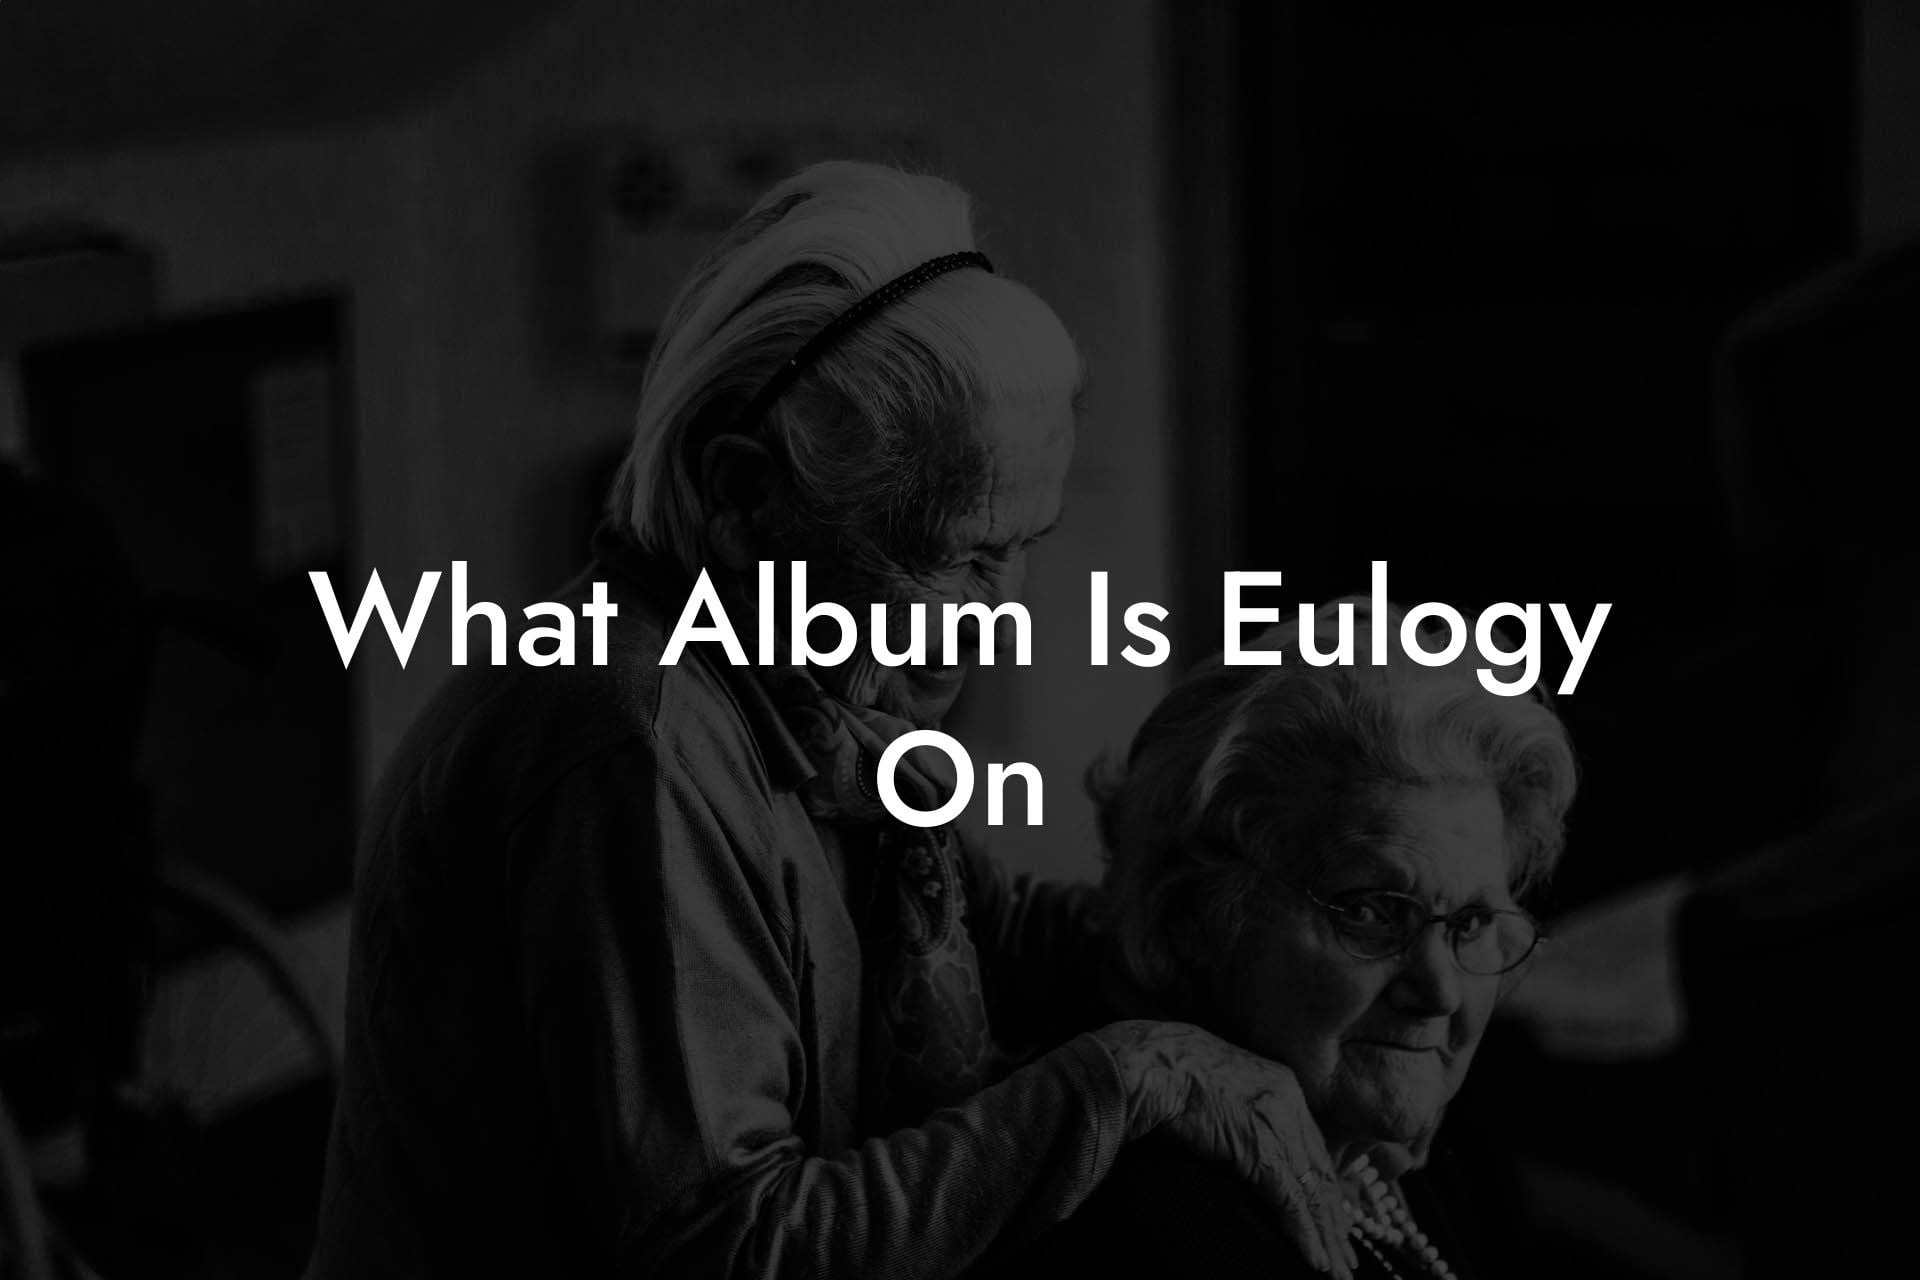 What Album Is Eulogy On